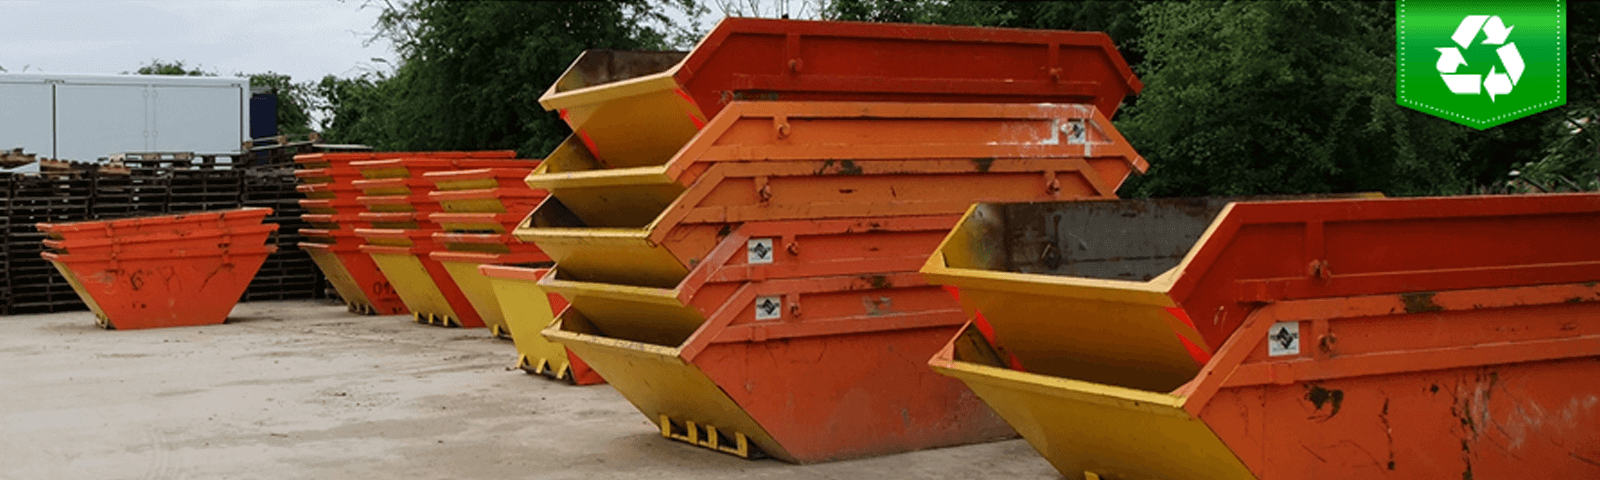 skip-hire-redditch-stacked-up-